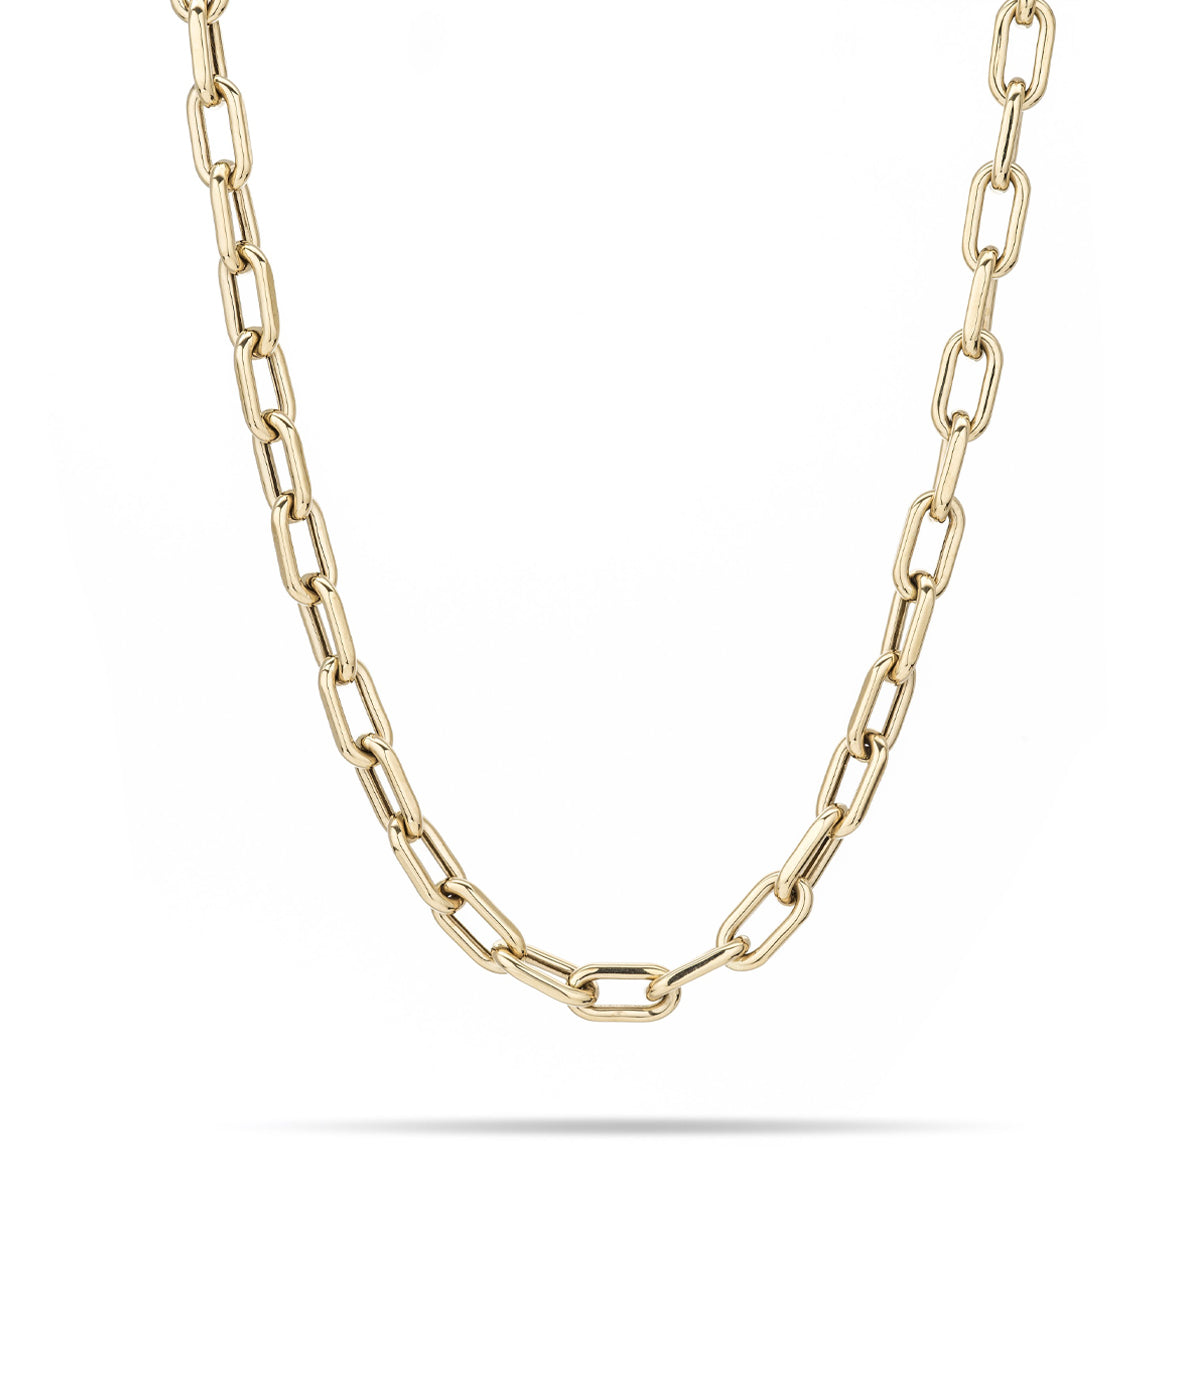 7mm Italian Chain Link Necklace in Yellow Gold